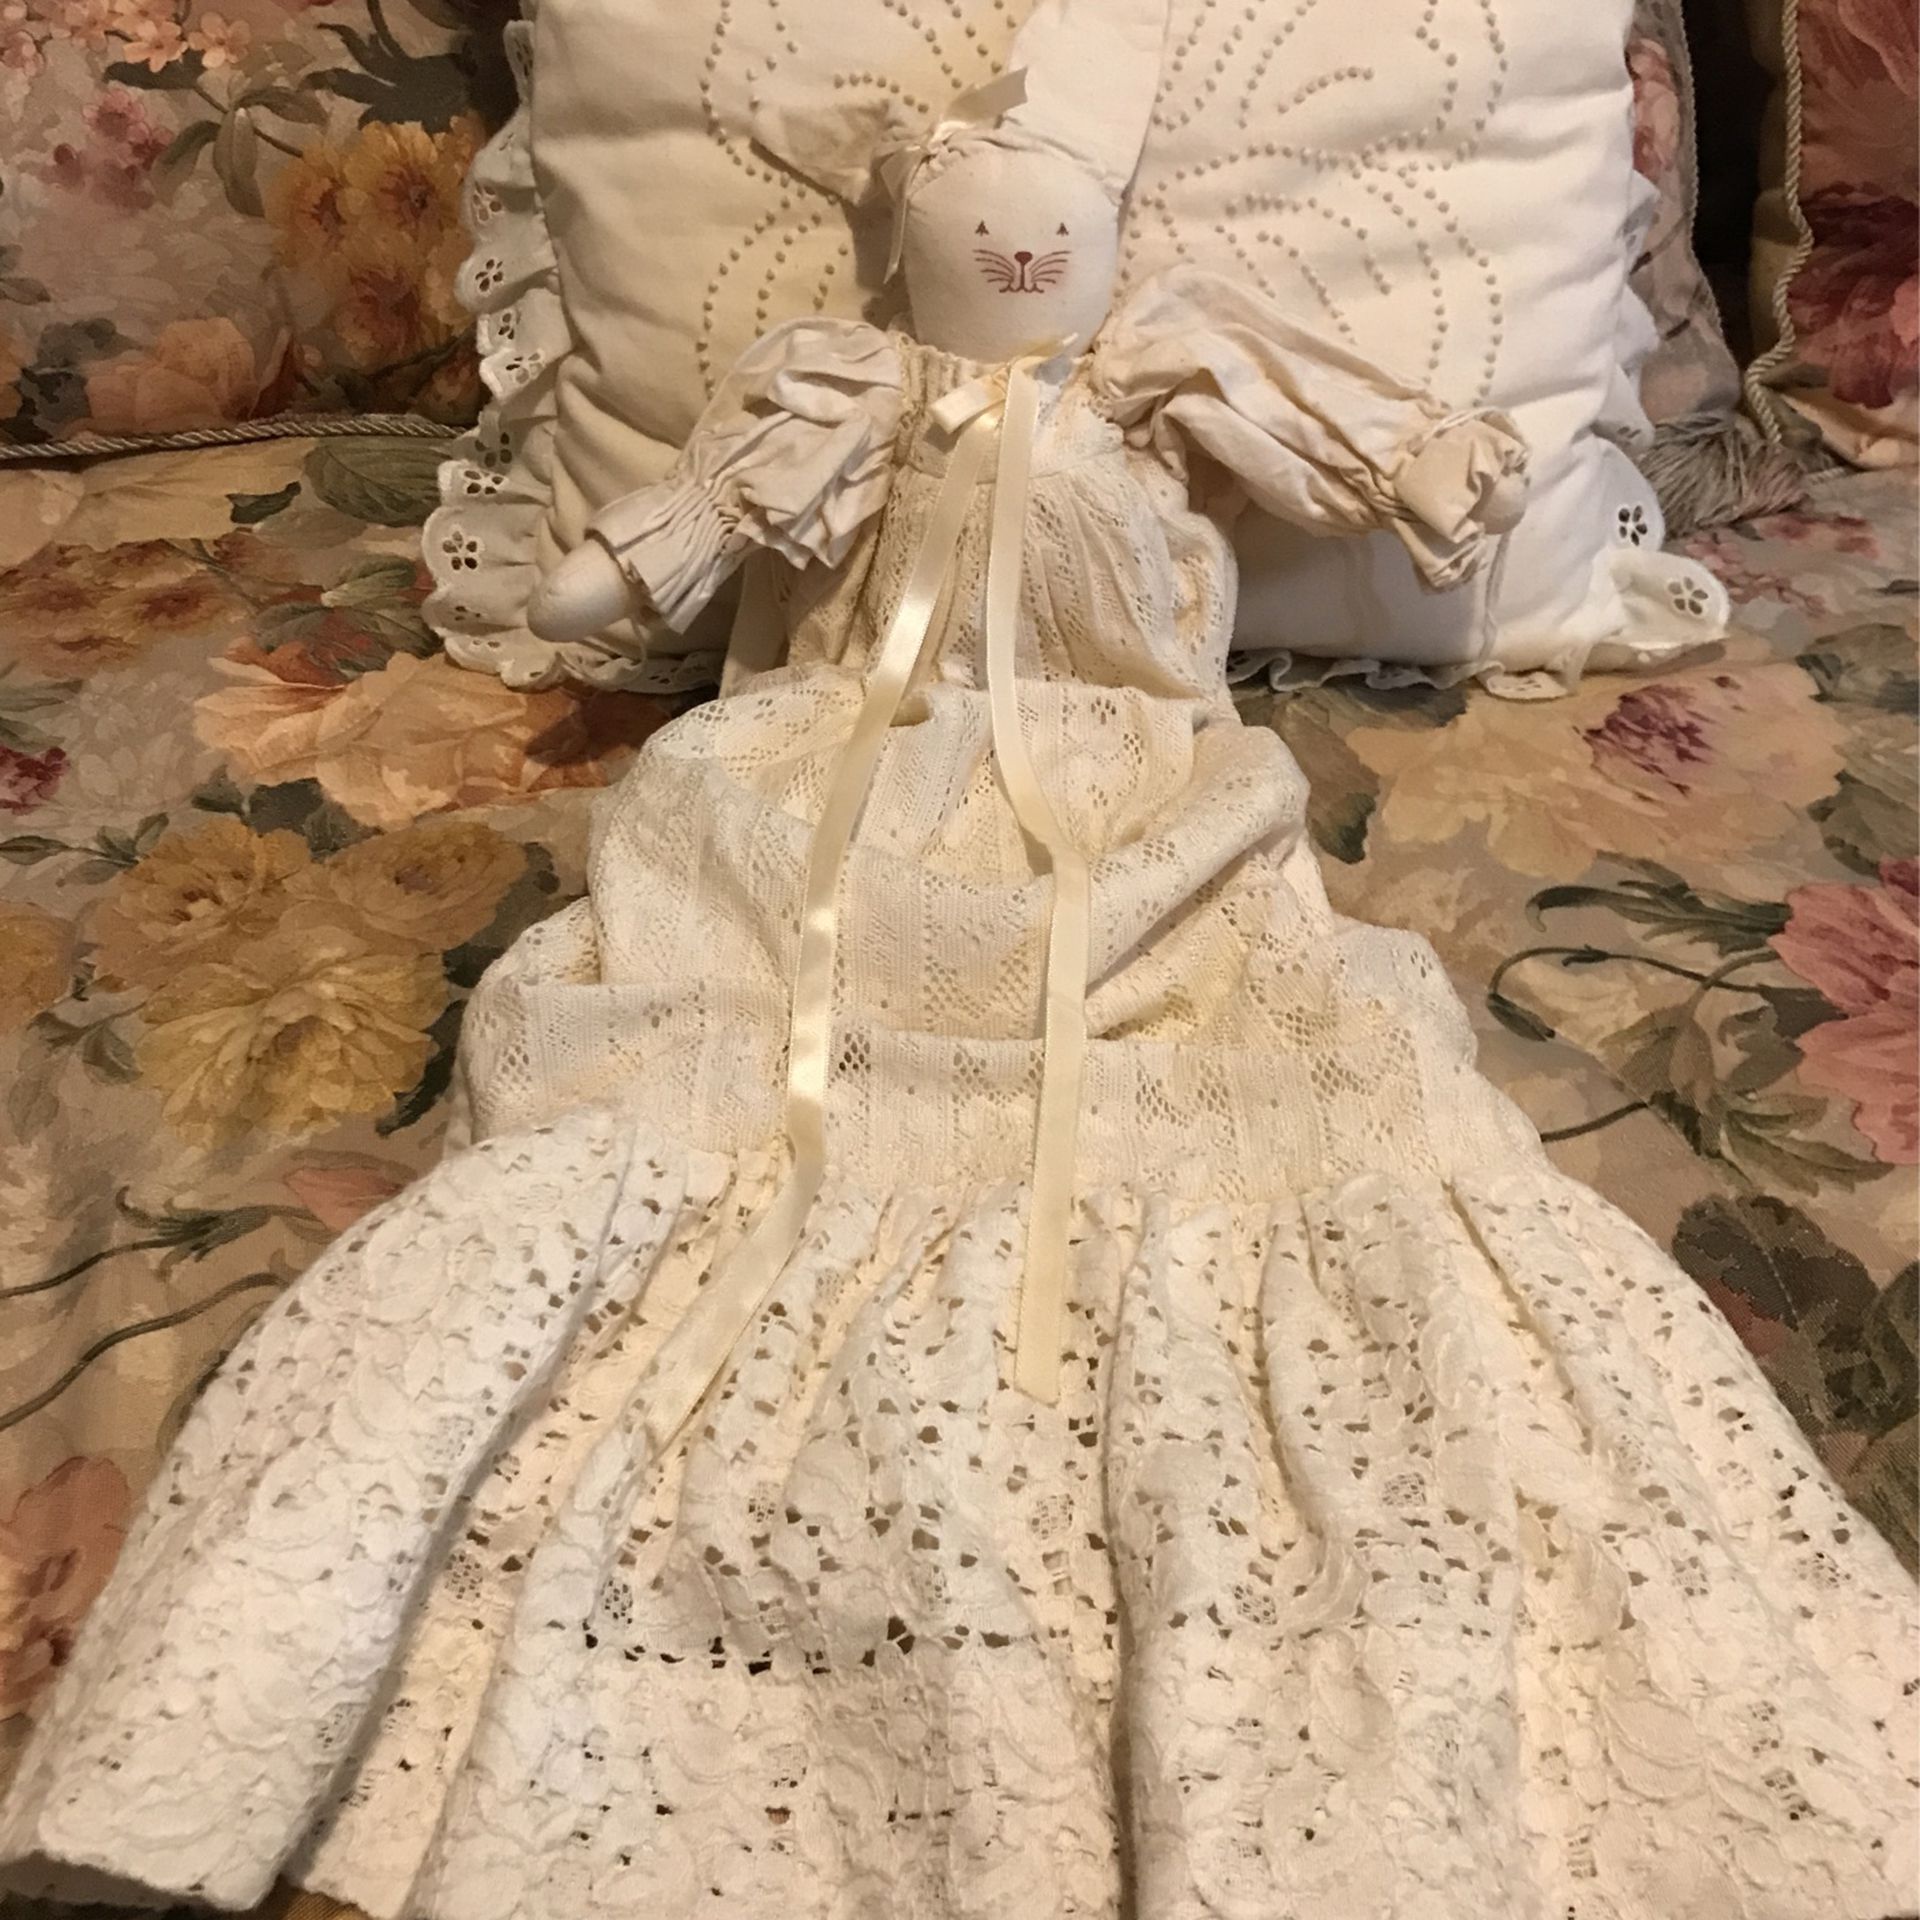 Precious ! Soft Cotton Bunny All Dressed In Gorgeous Batten Cotton Lace Dress !!!!